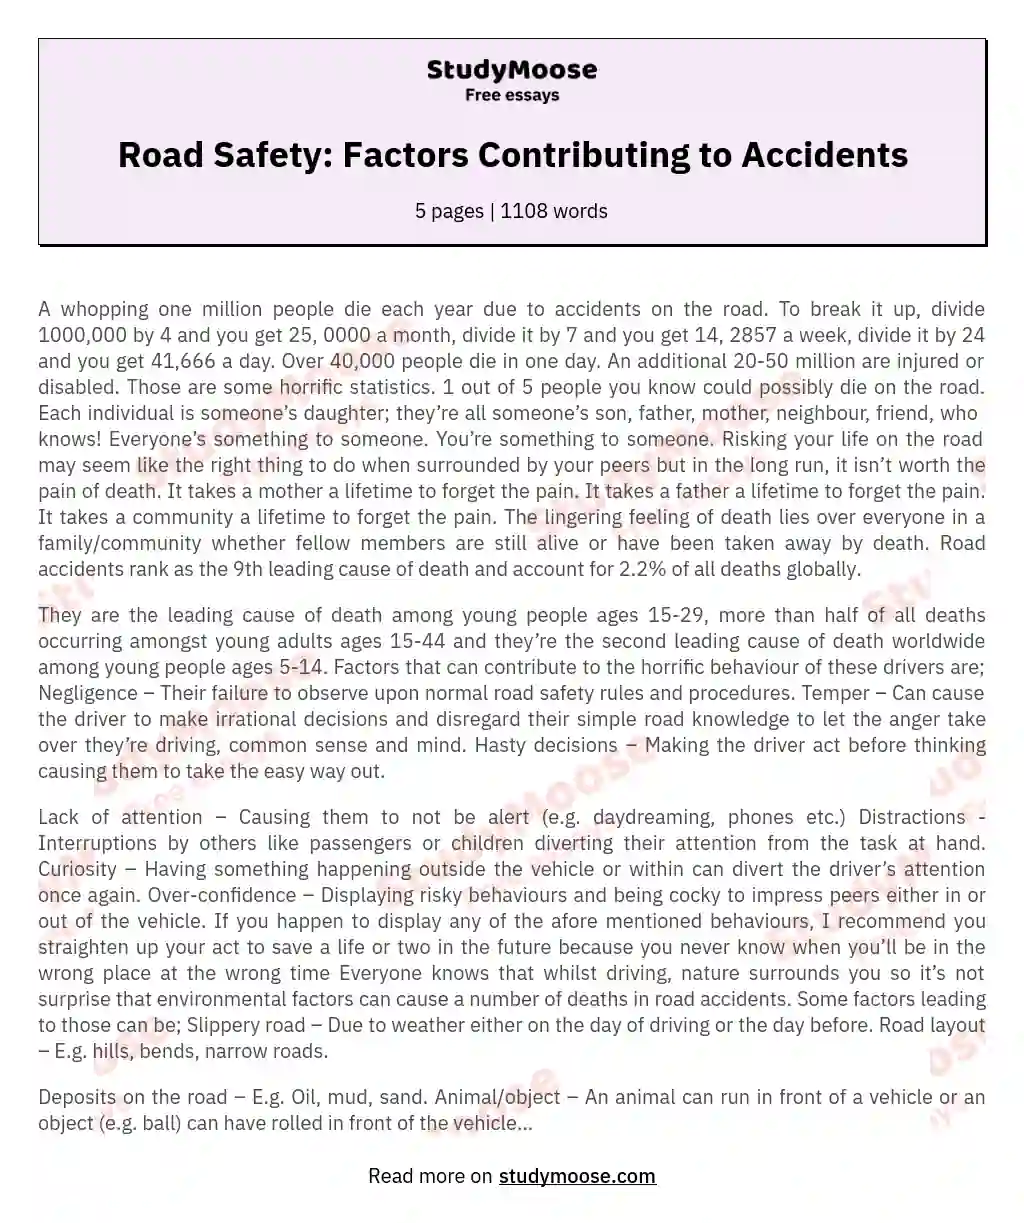 Road Safety: Factors Contributing to Accidents